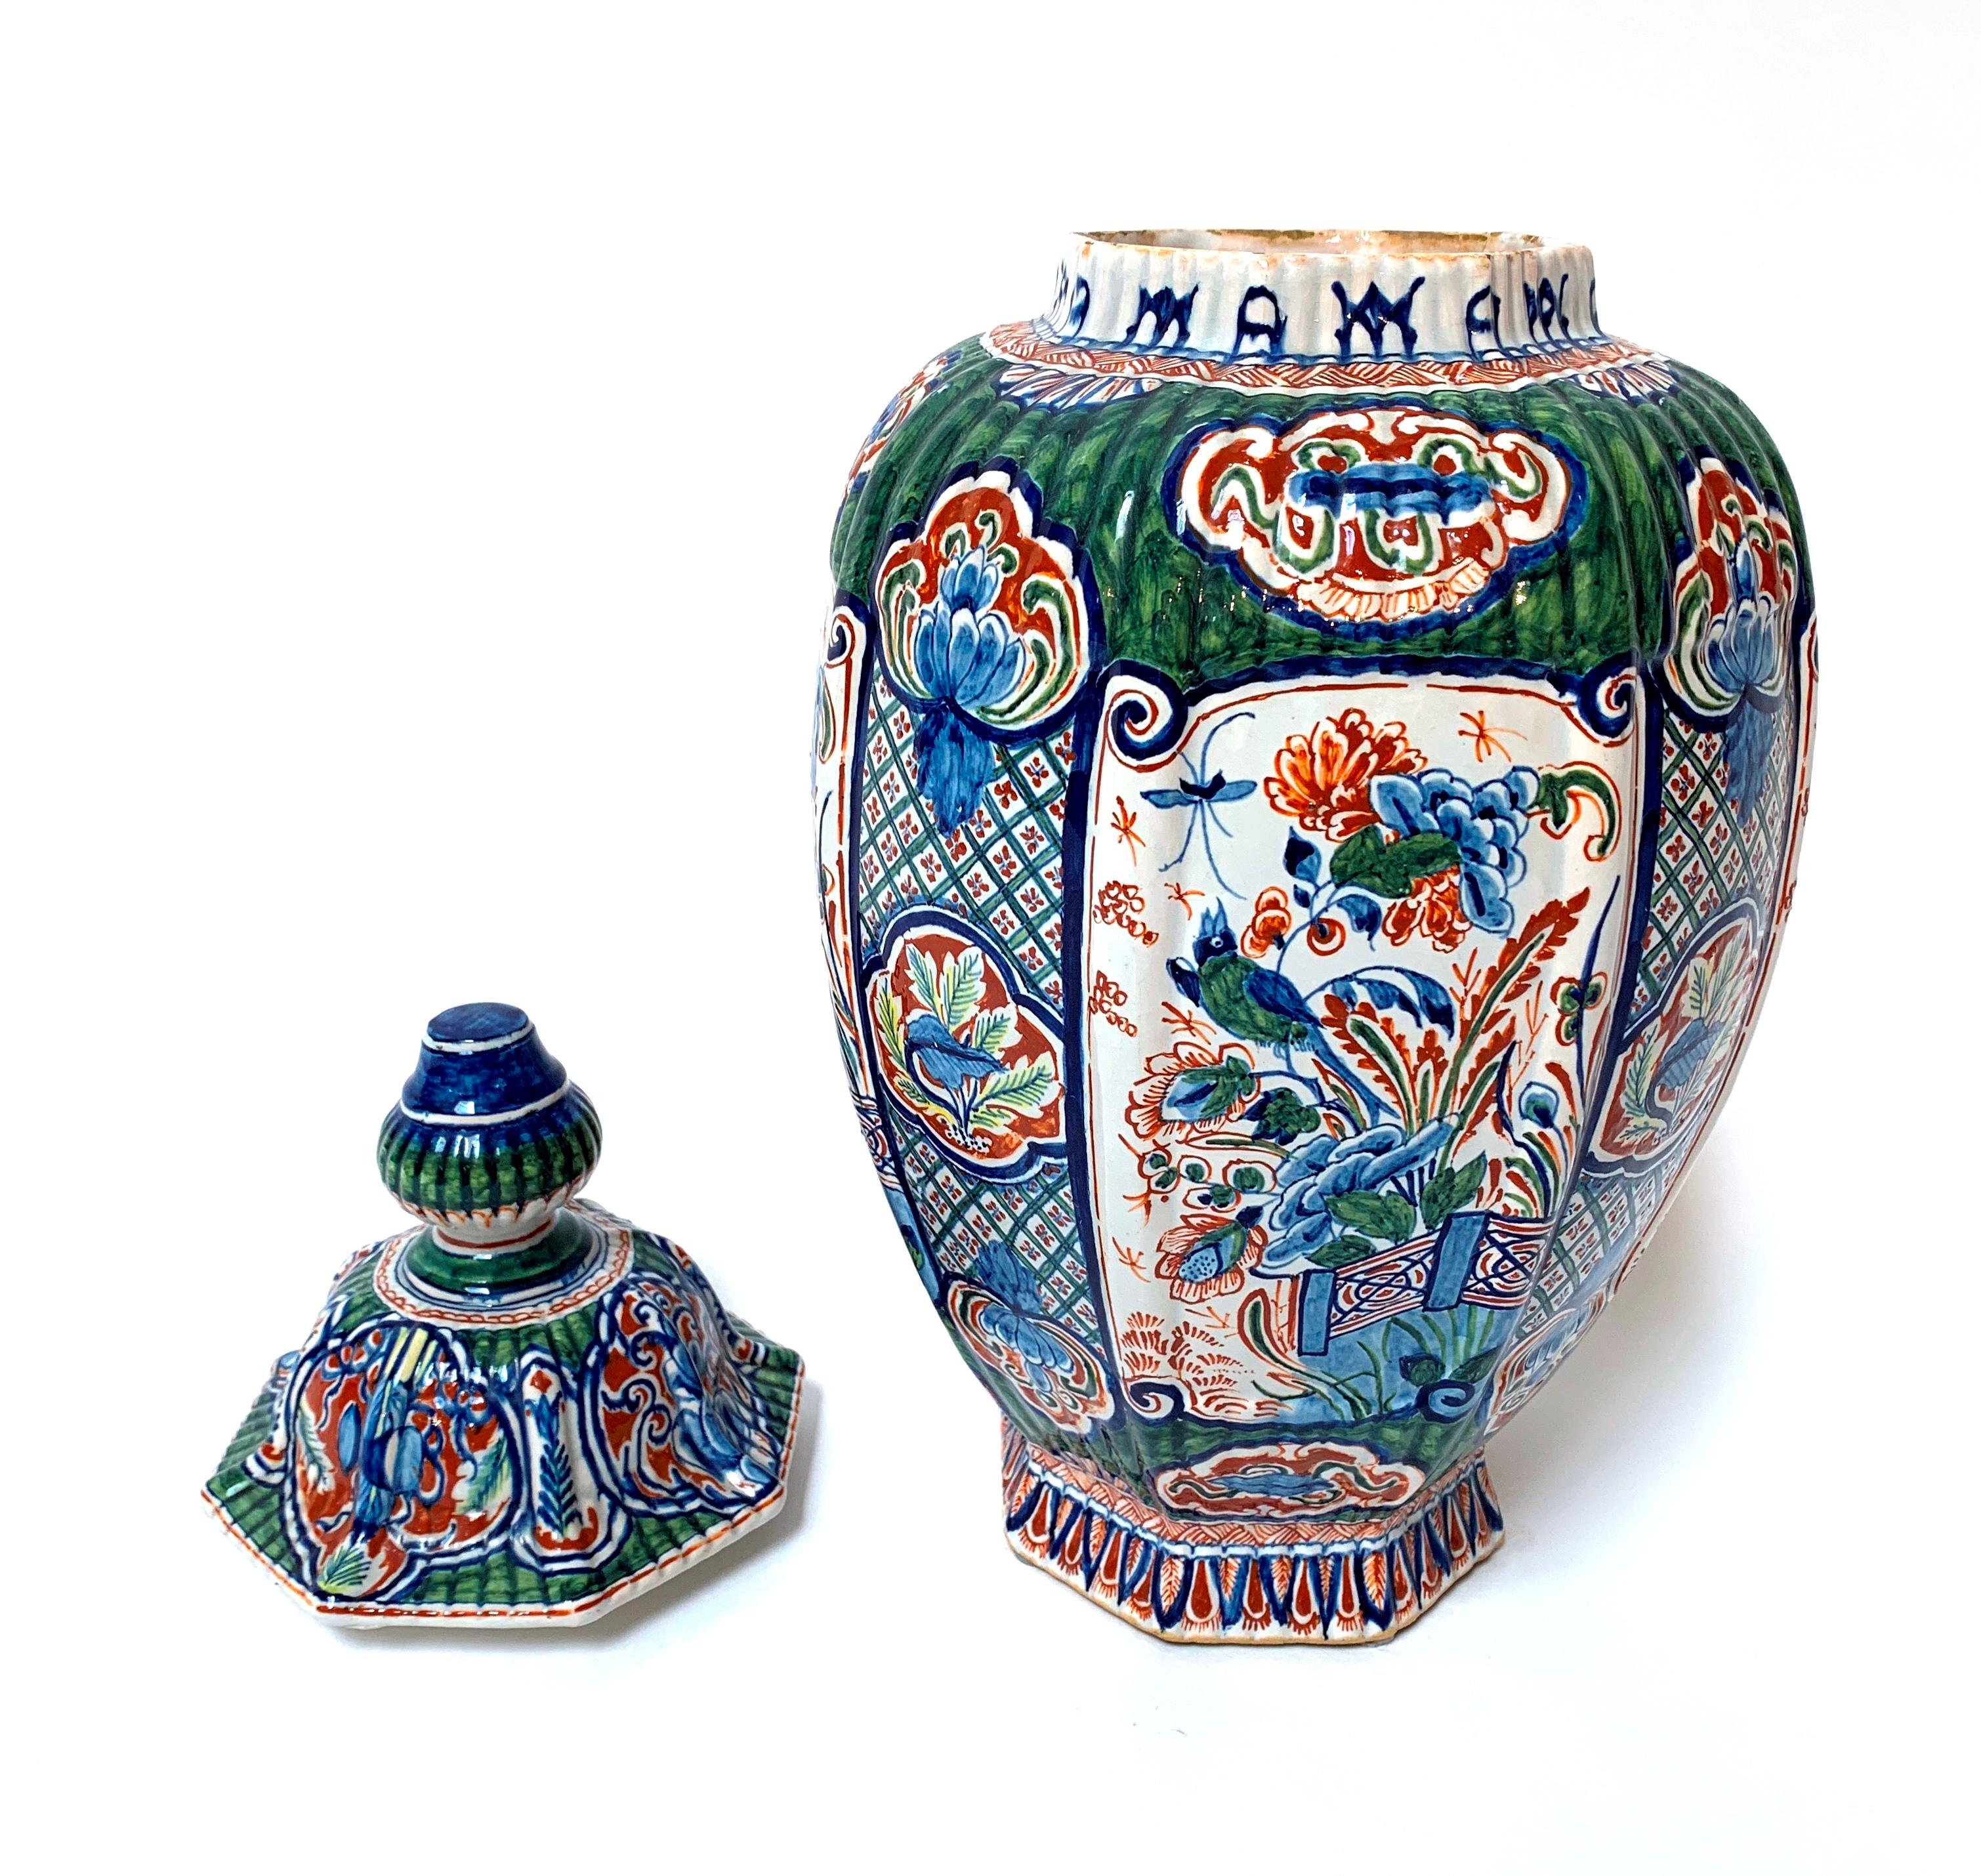 Porcelain 19th Century Delftware Polychrome Enameled Vase and Cover